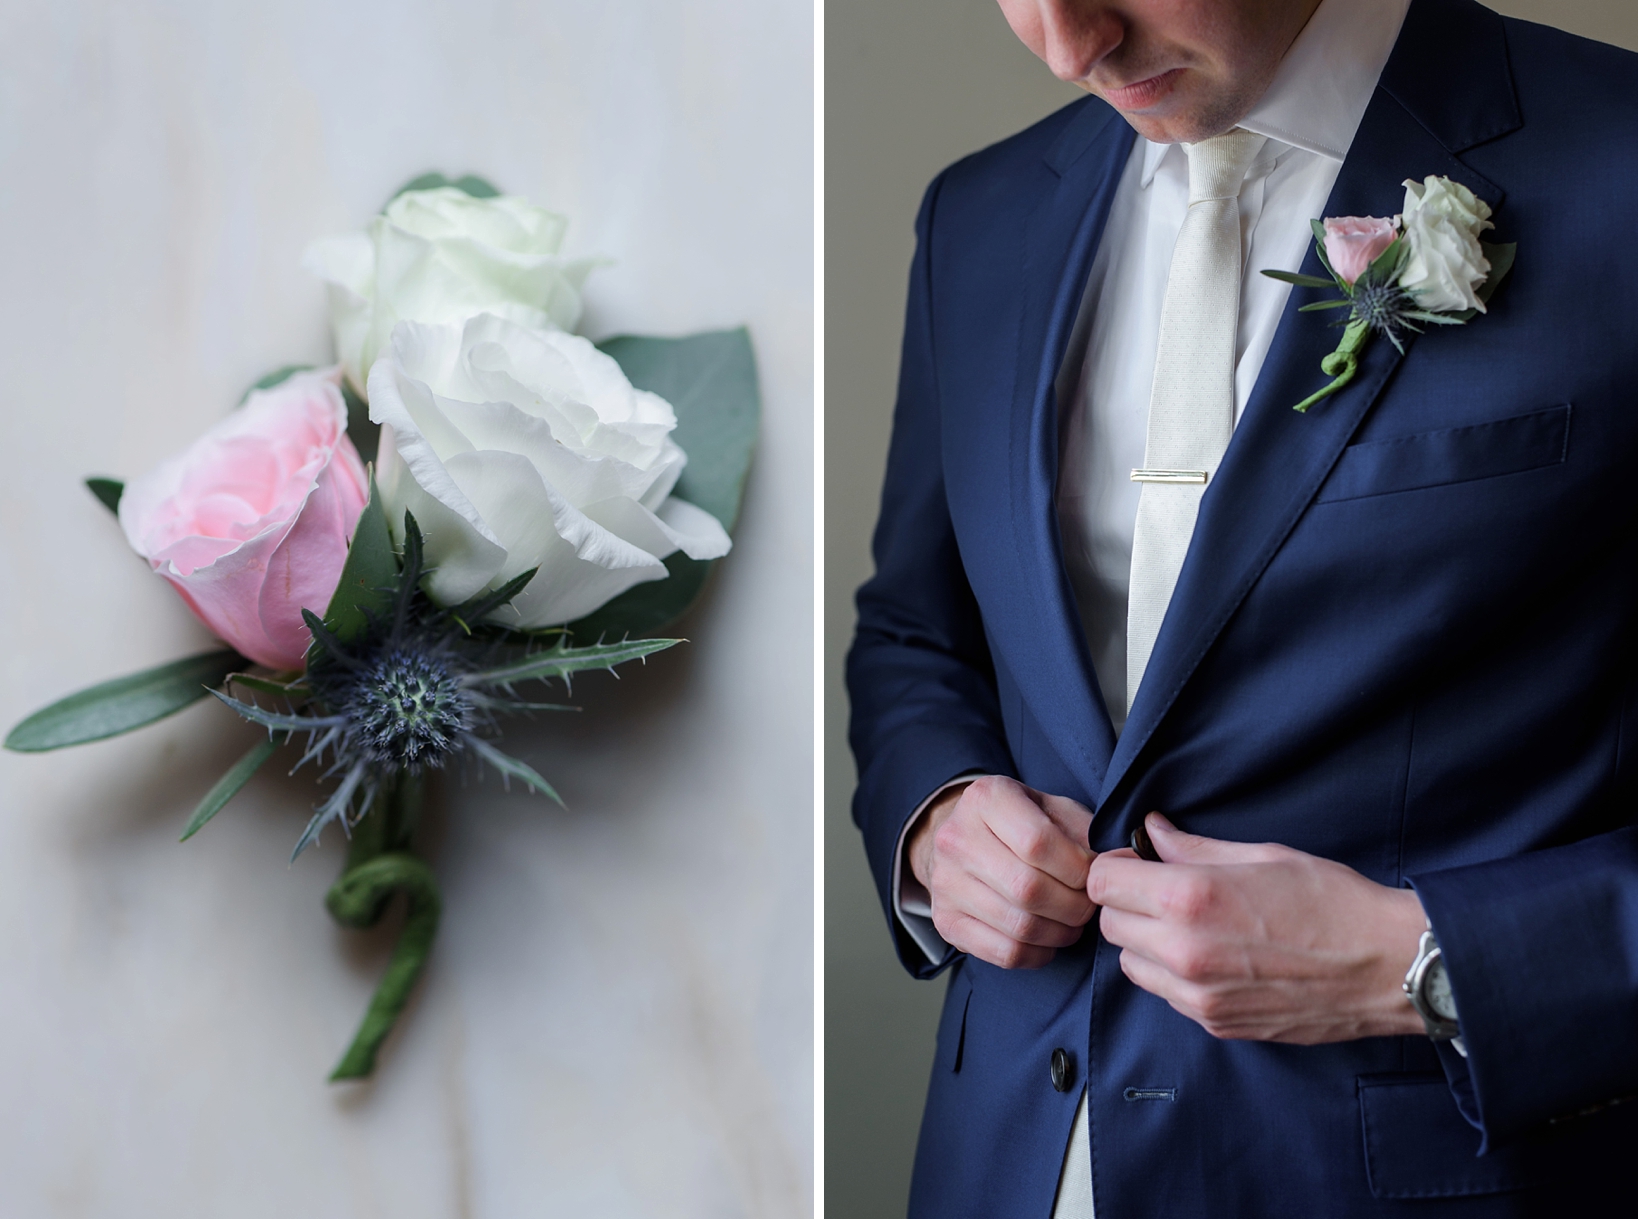 The boutonniere with tiny flowers against the groom's navy suit